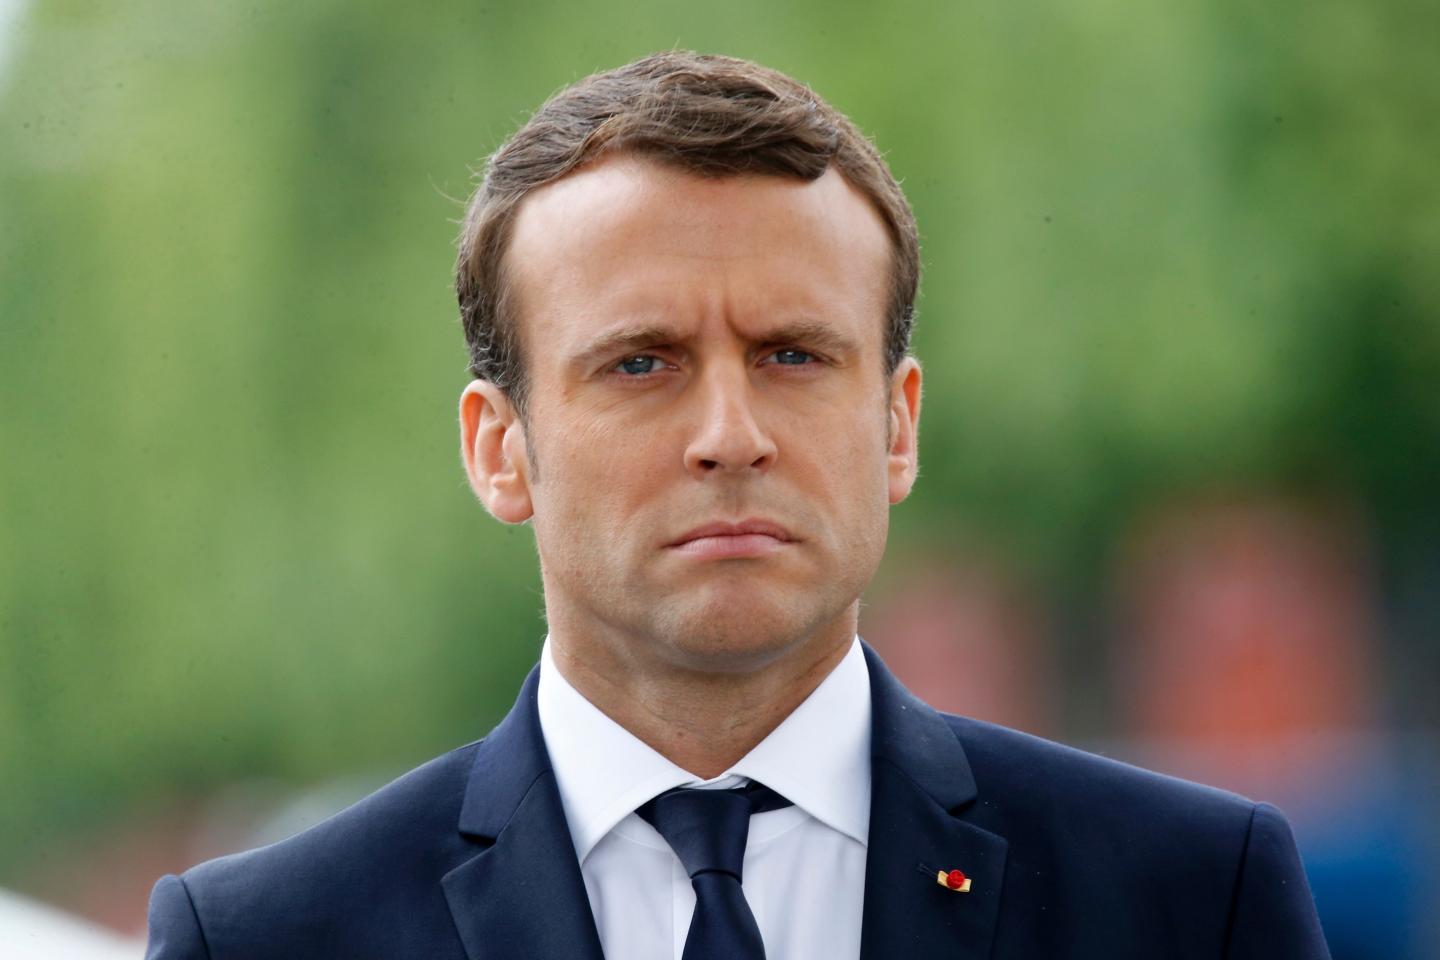 Original image of the French president